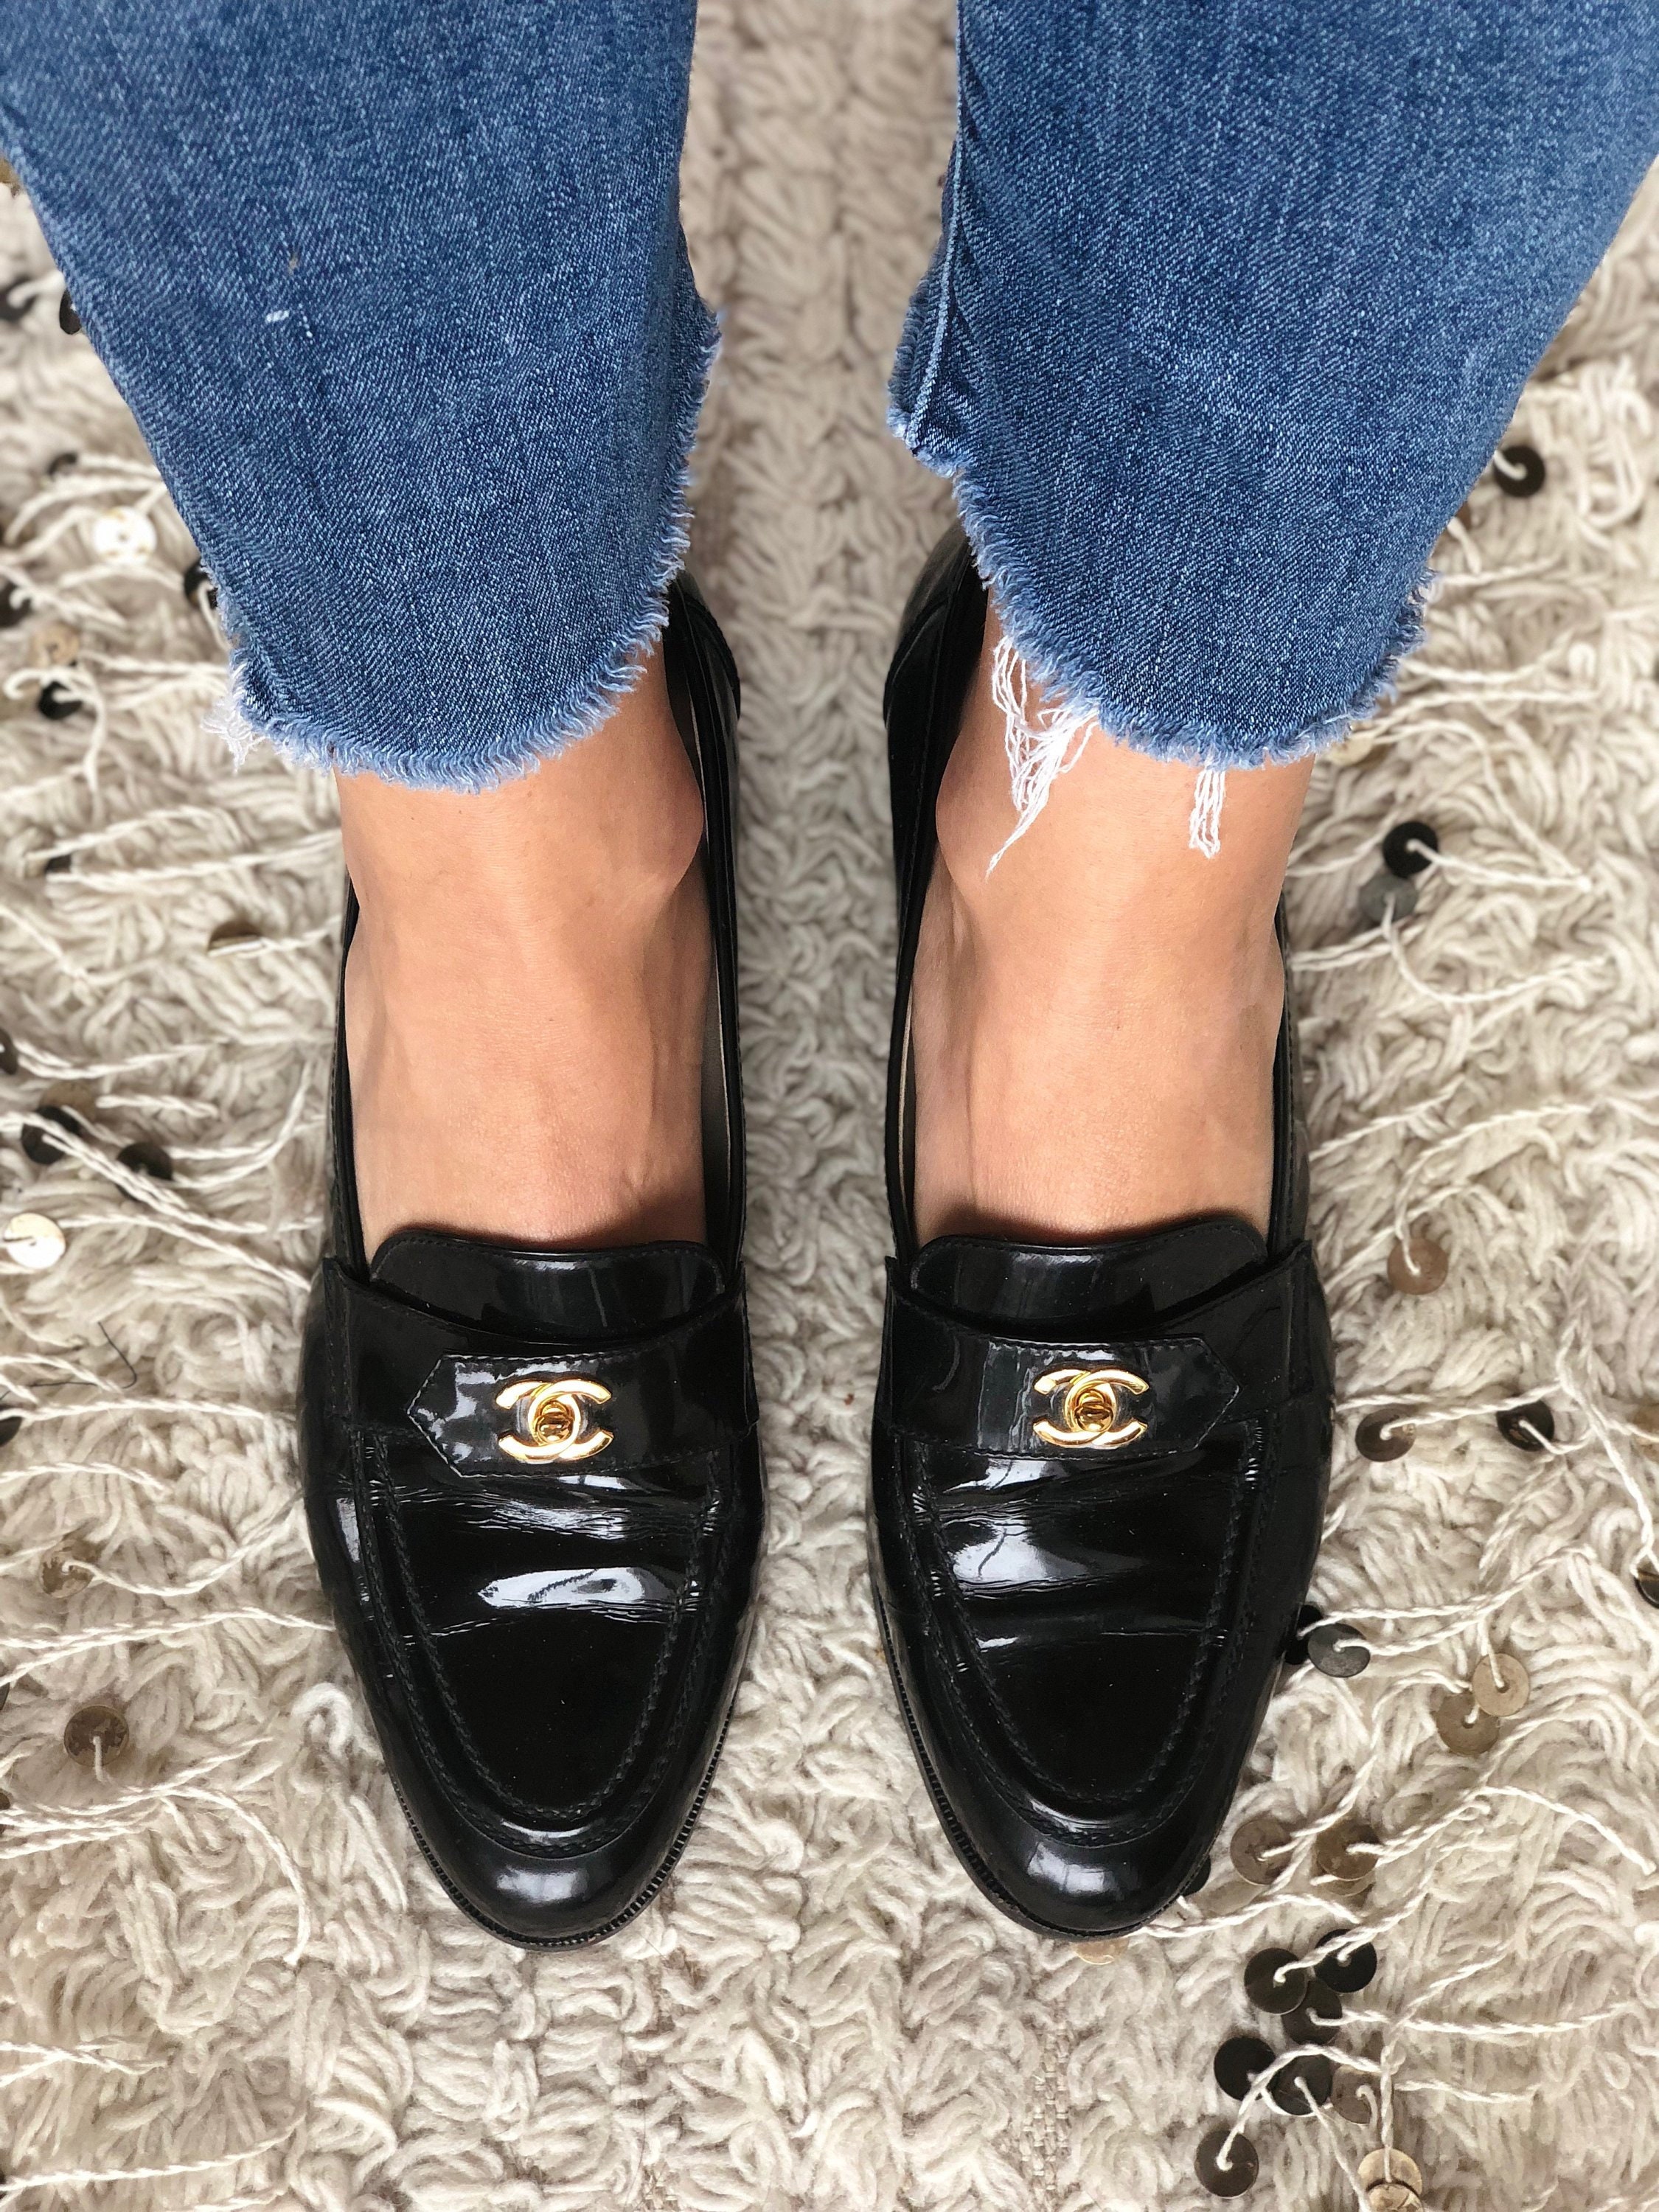 CHANEL, Shoes, Chanel Turn Lock Loafers Brand New